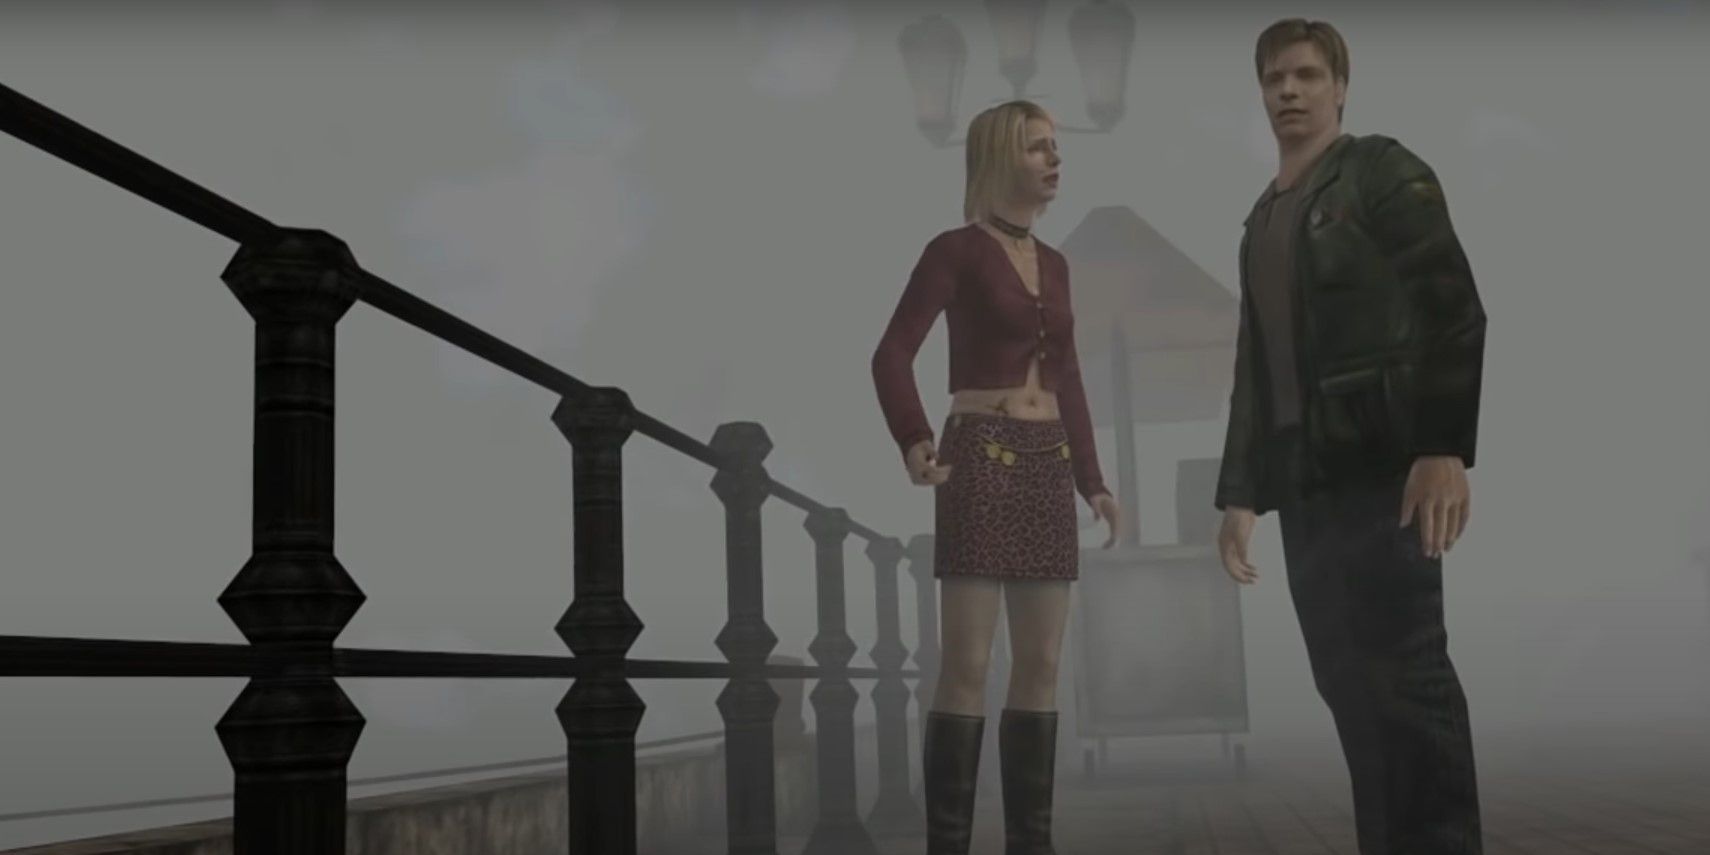 A screenshot showing gameplay in Silent Hill 2